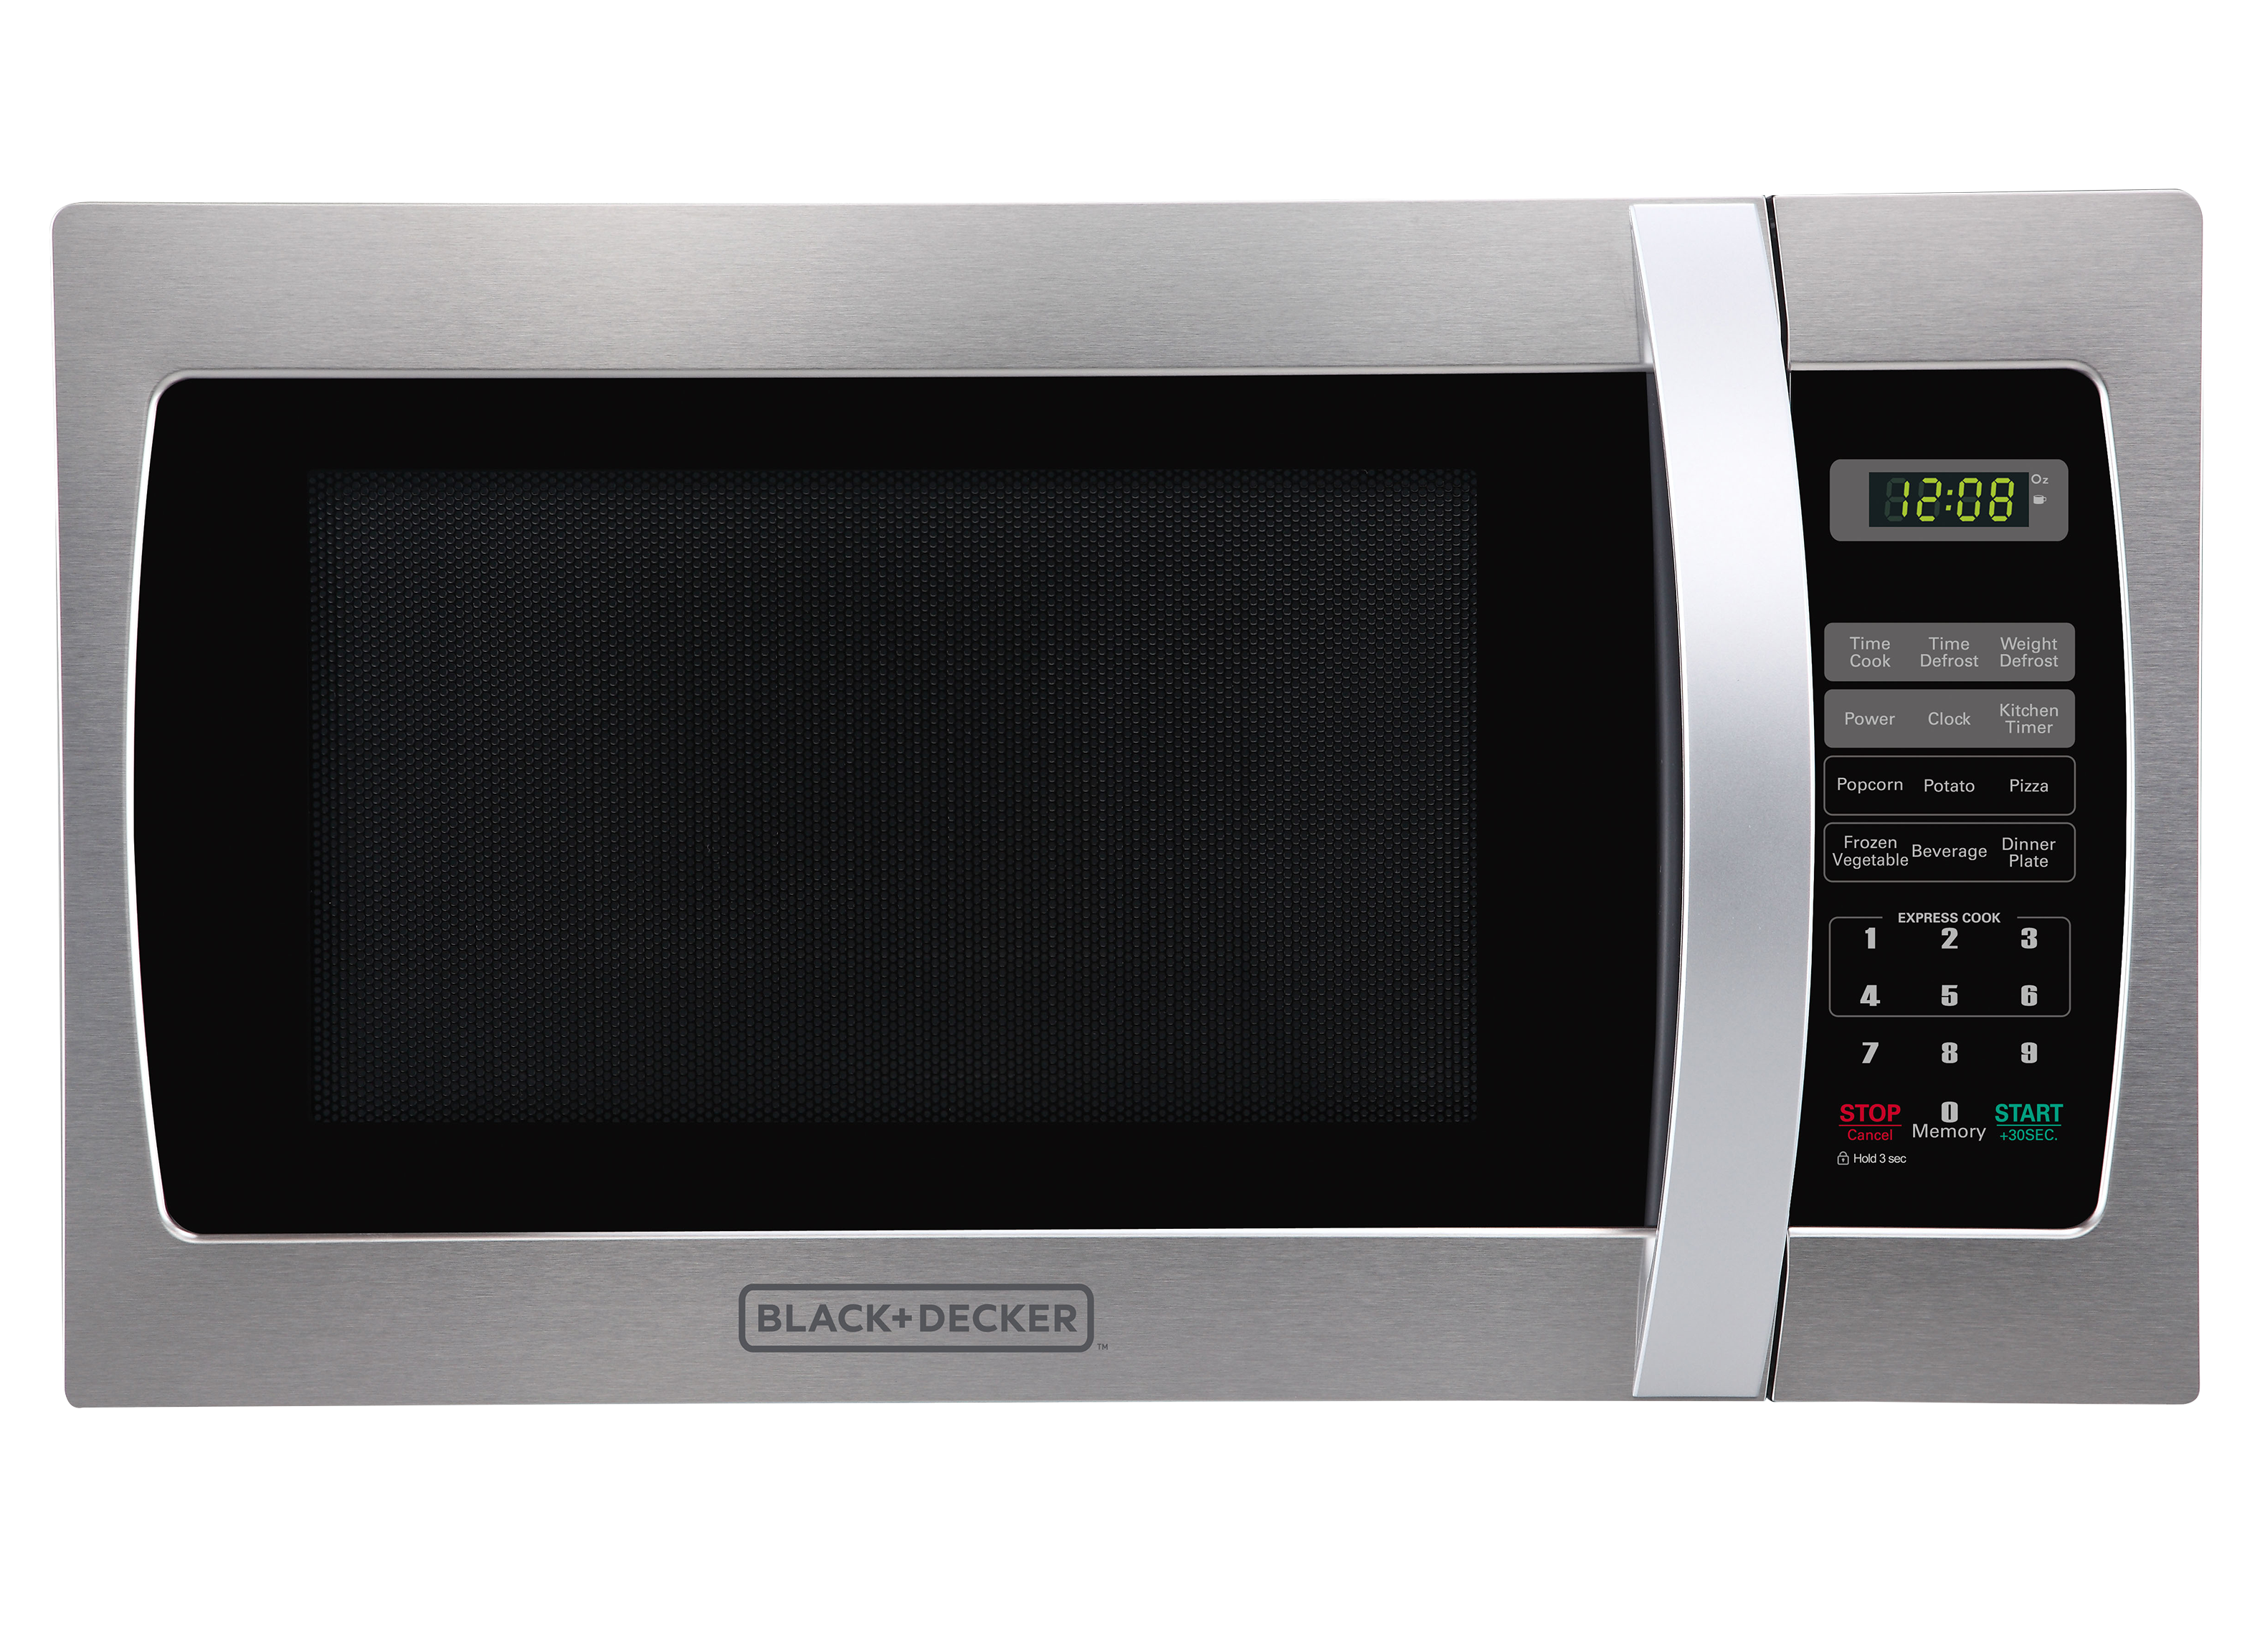 https://crdms.images.consumerreports.org/prod/products/cr/models/406707-large-countertop-microwaves-black-decker-em034aj2-x-10029885.png